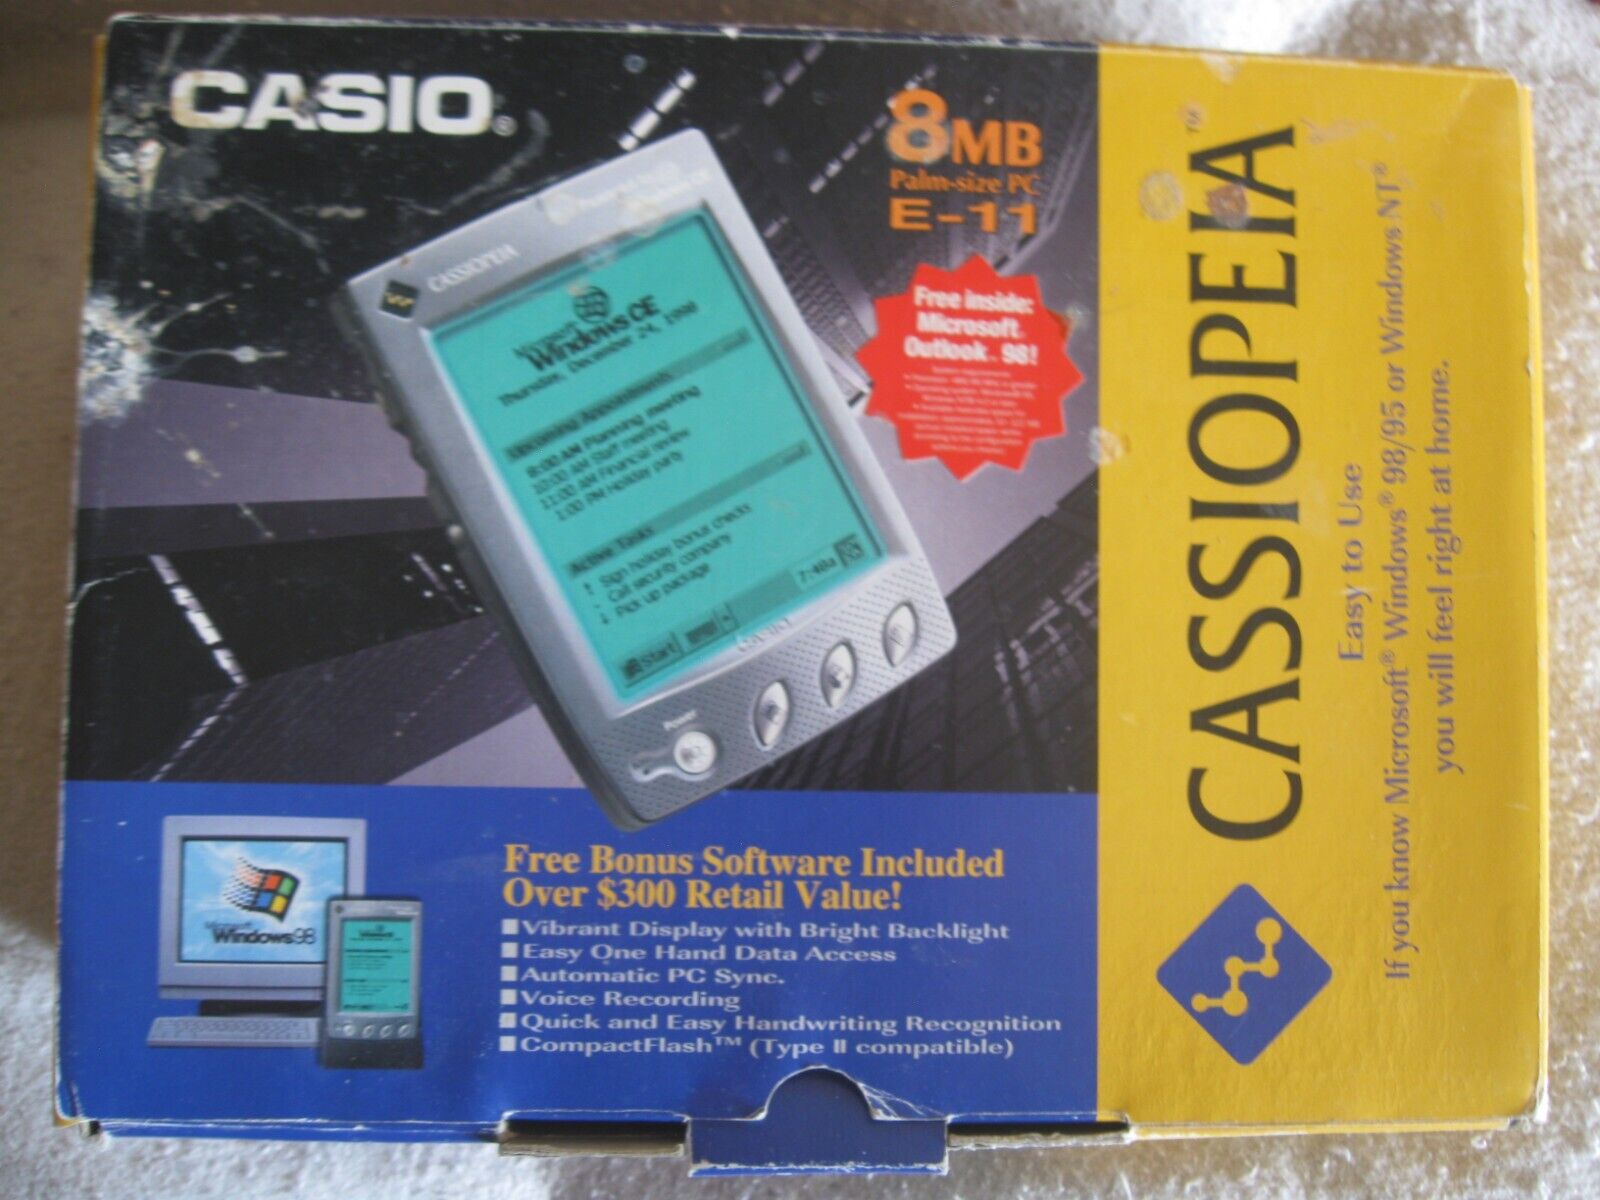 Vintage Casio Cassiopeia E-11 8mb Palm Size PC, Boxed and in NICE condition.